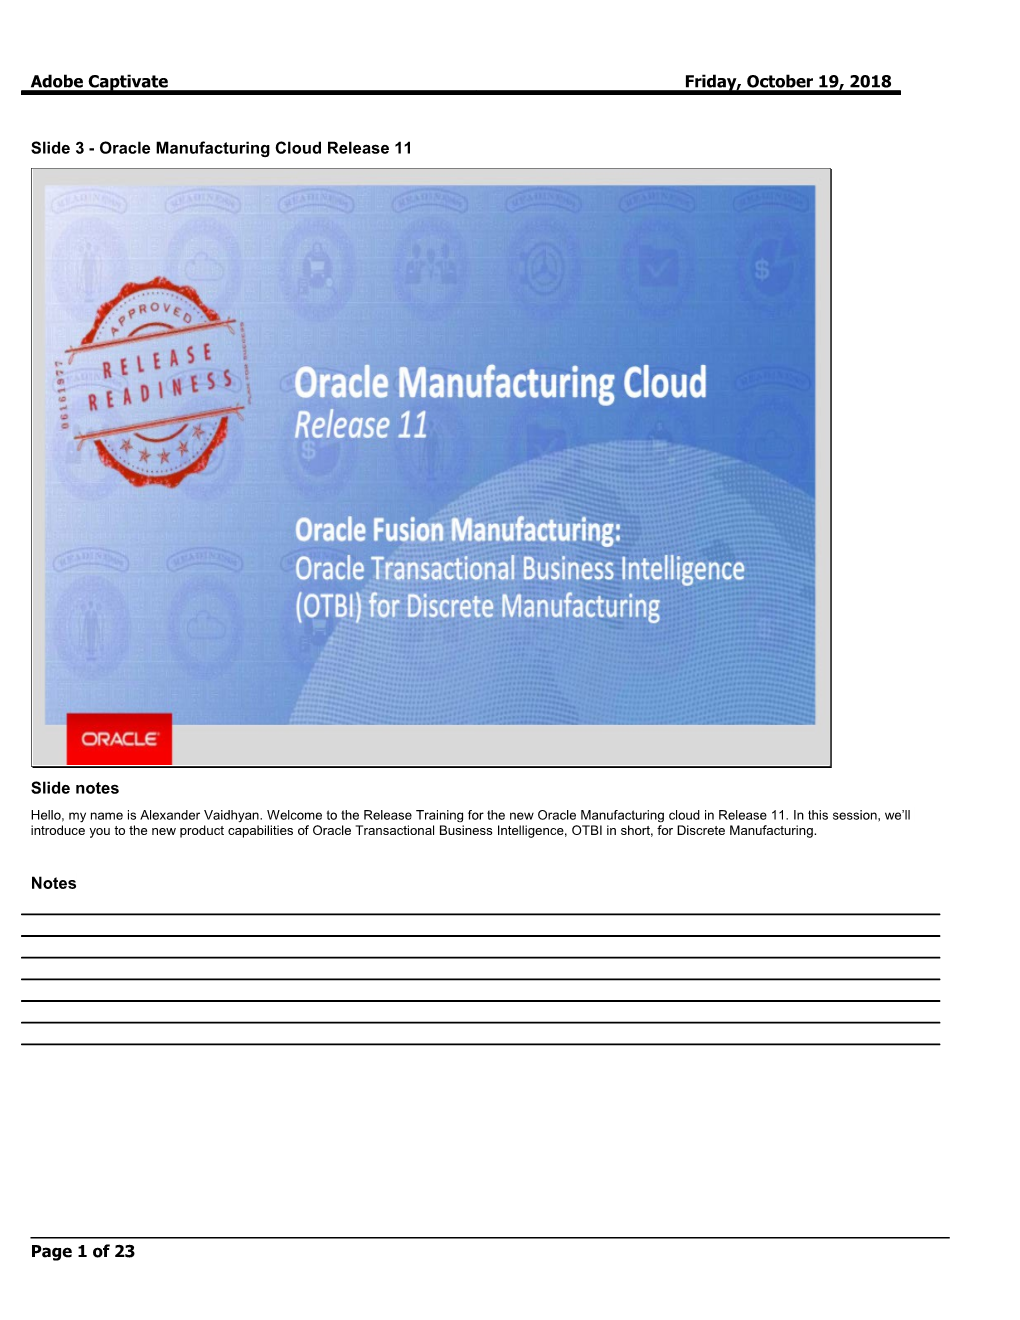 Slide 3 - Oracle Manufacturing Cloud Release 11